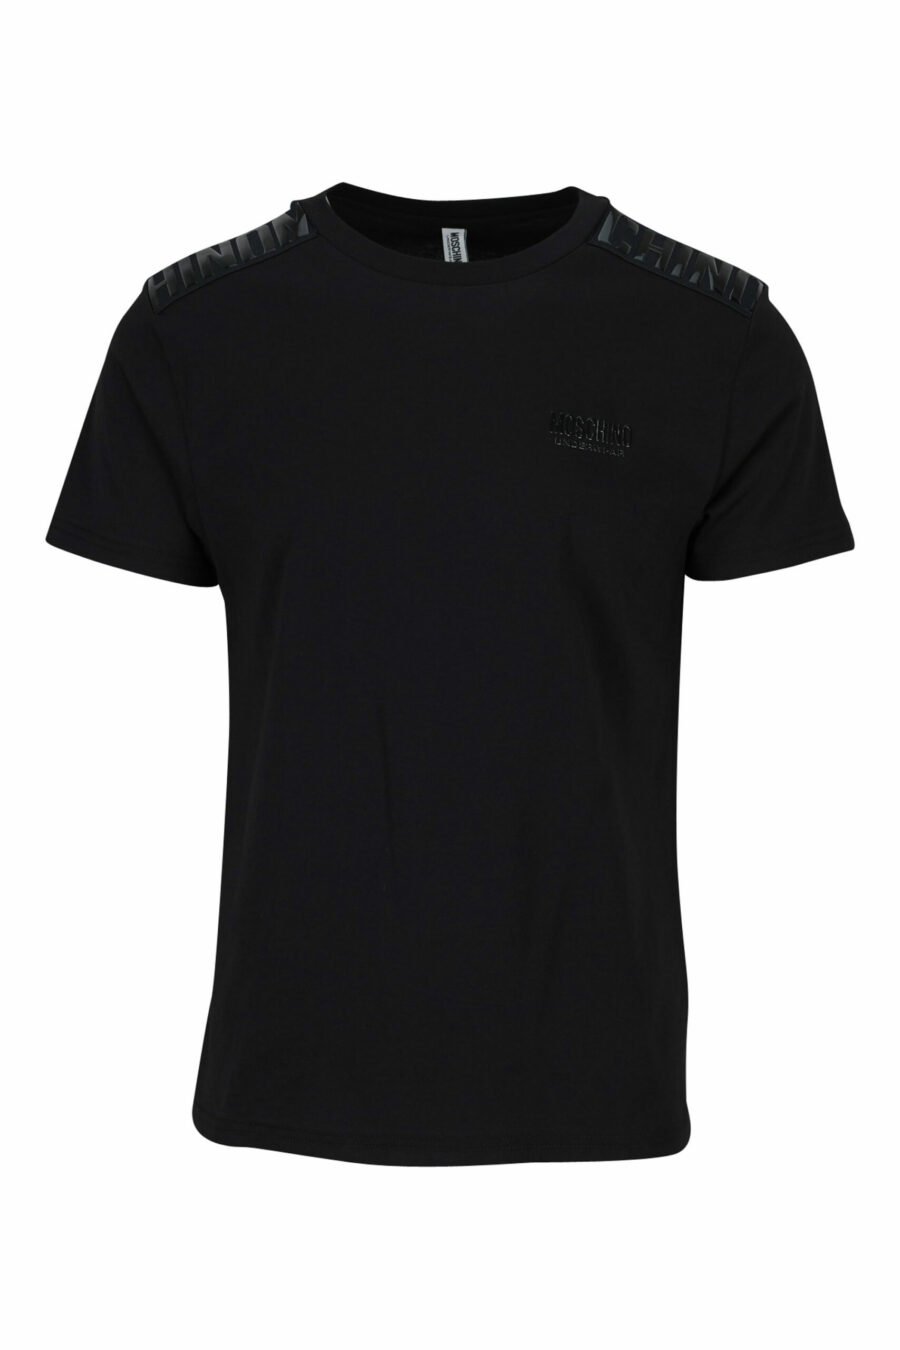 Black T-shirt with monochrome logo tape on shoulders - 889316992724 scaled